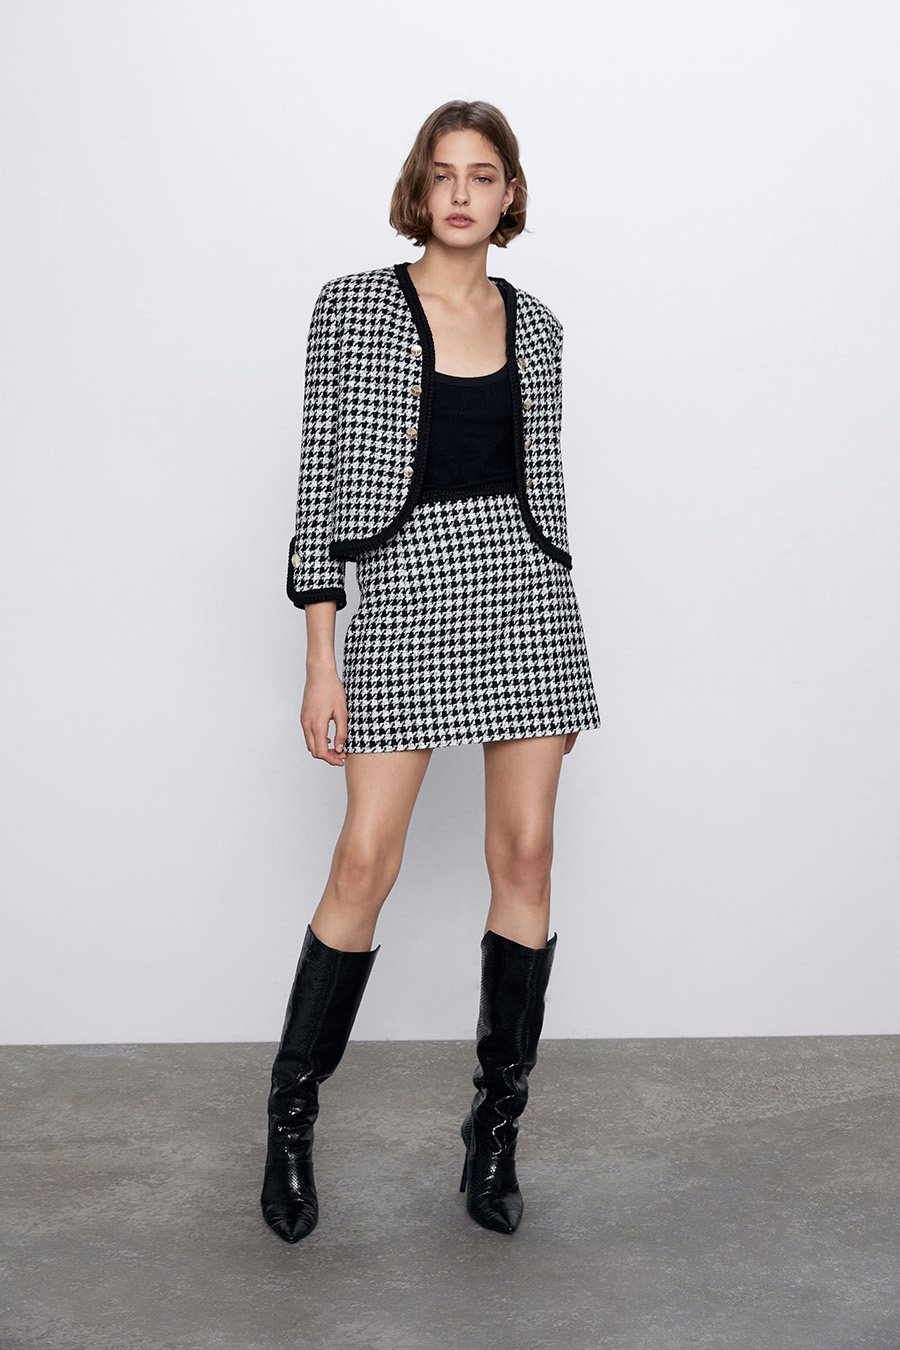 Fashion Black And White Tweed Button-down Coat,Coat-Jacket